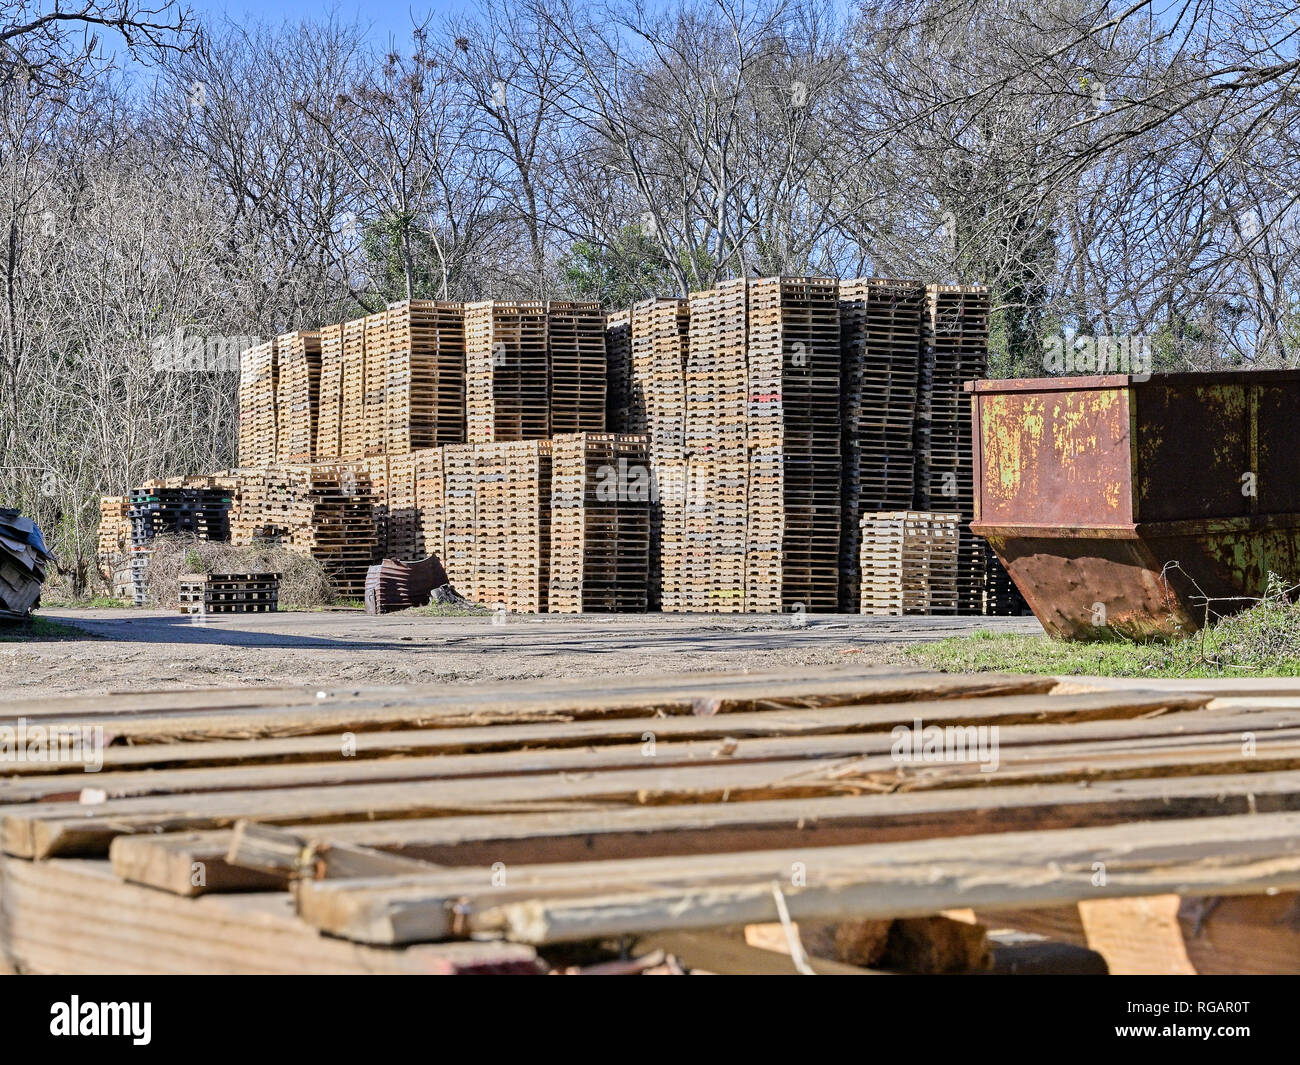 Wooden pallets are stacked high in storage waiting for use in Montgomery Alabama, USA. Stock Photo